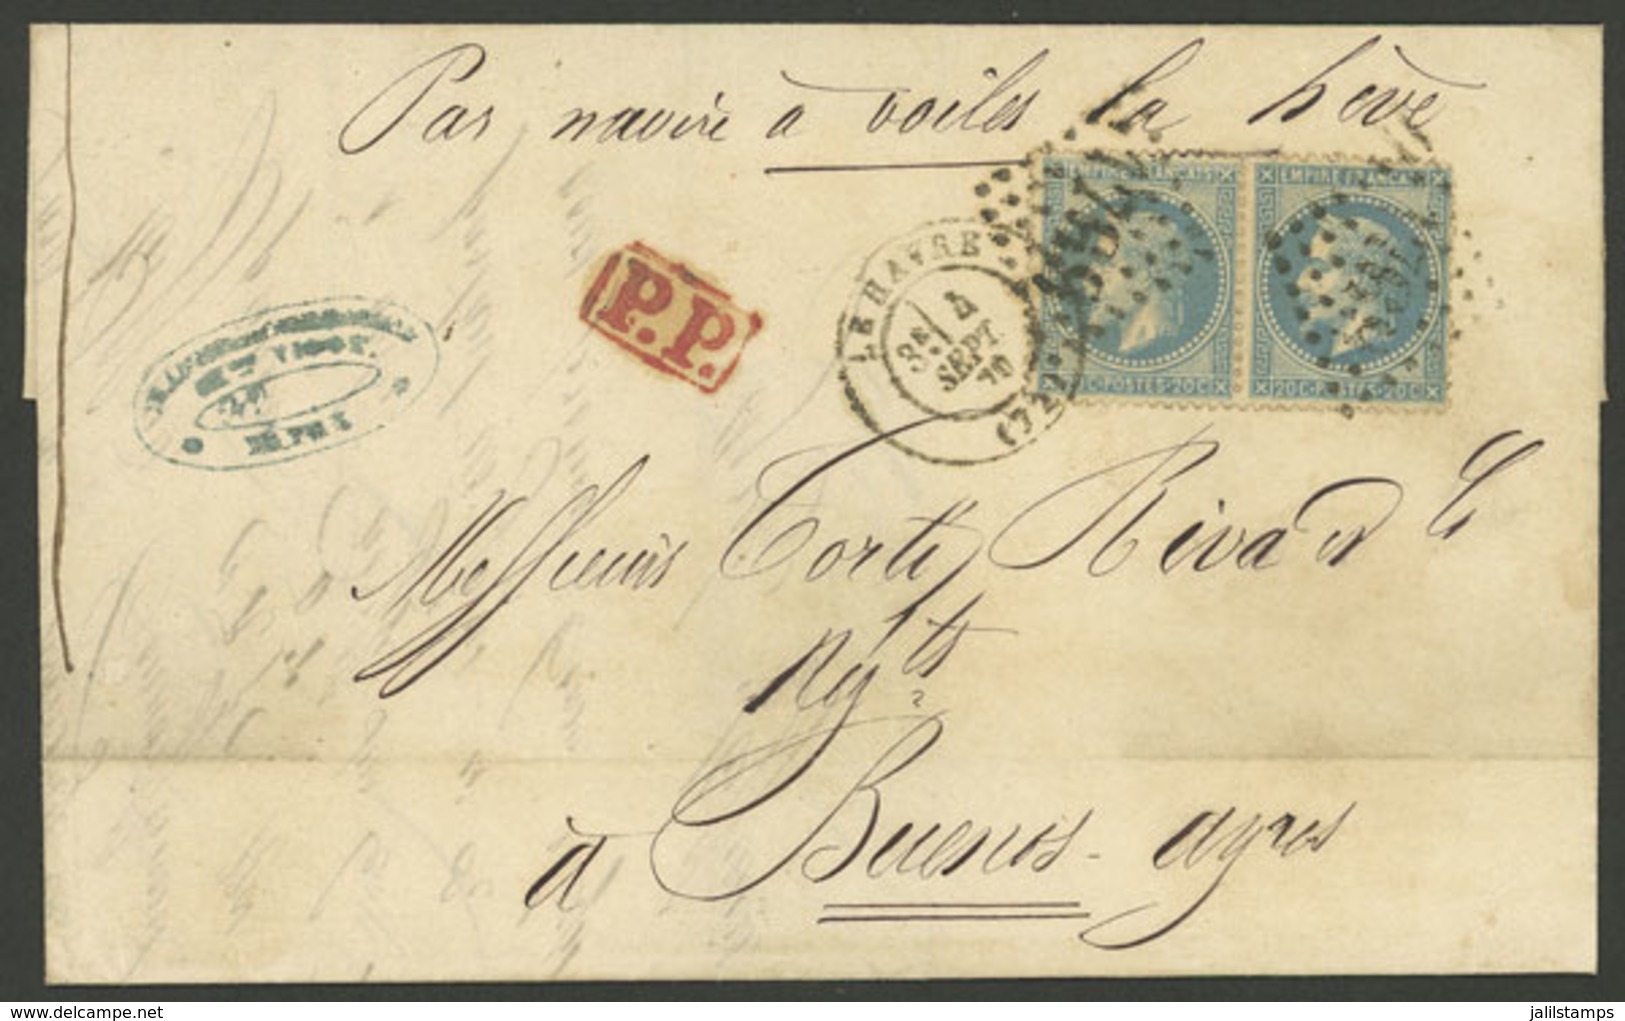 FRANCE: 4/SE/1870 Le Havre - Buenos Aires "by Sailing Ship From Le Havre", Folded Cover Franked With 40c. (pair 20c. Nap - 1863-1870 Napoléon III Con Laureles